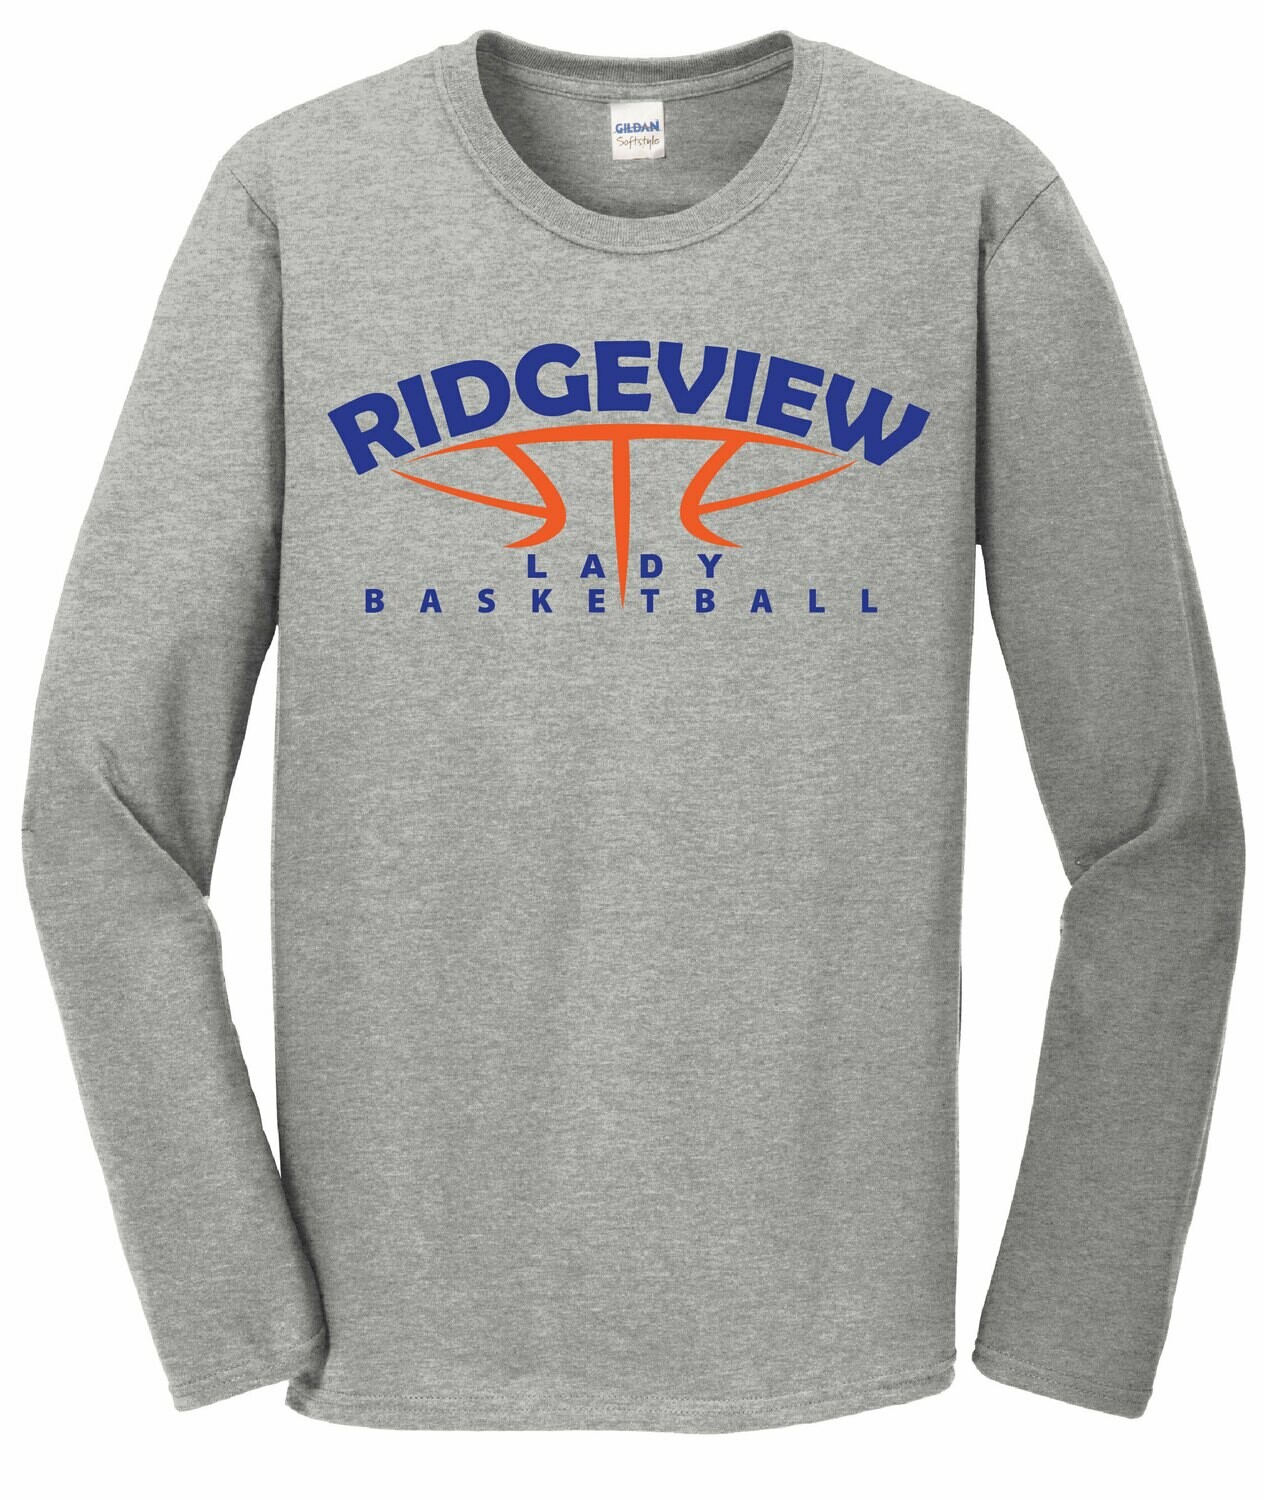 Lady Basketball Softstyle Long Sleeve Tee - 2 Color